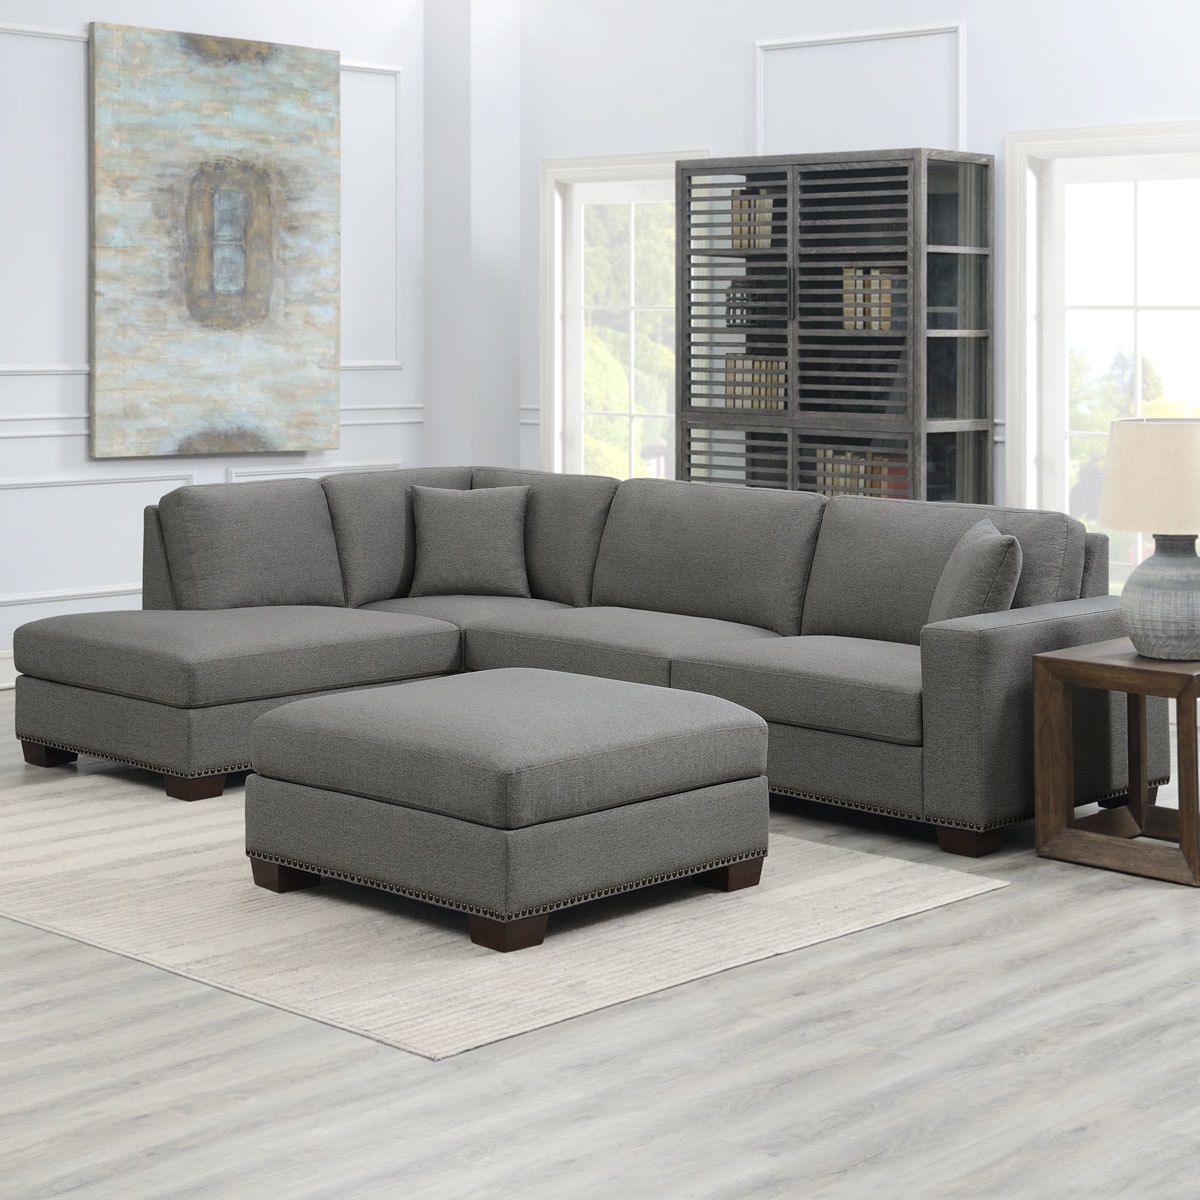 Thomasville Artesia Grey Fabric Sectional Sofa With Ottoman, Right In Current Sofas With Ottomans (View 9 of 15)